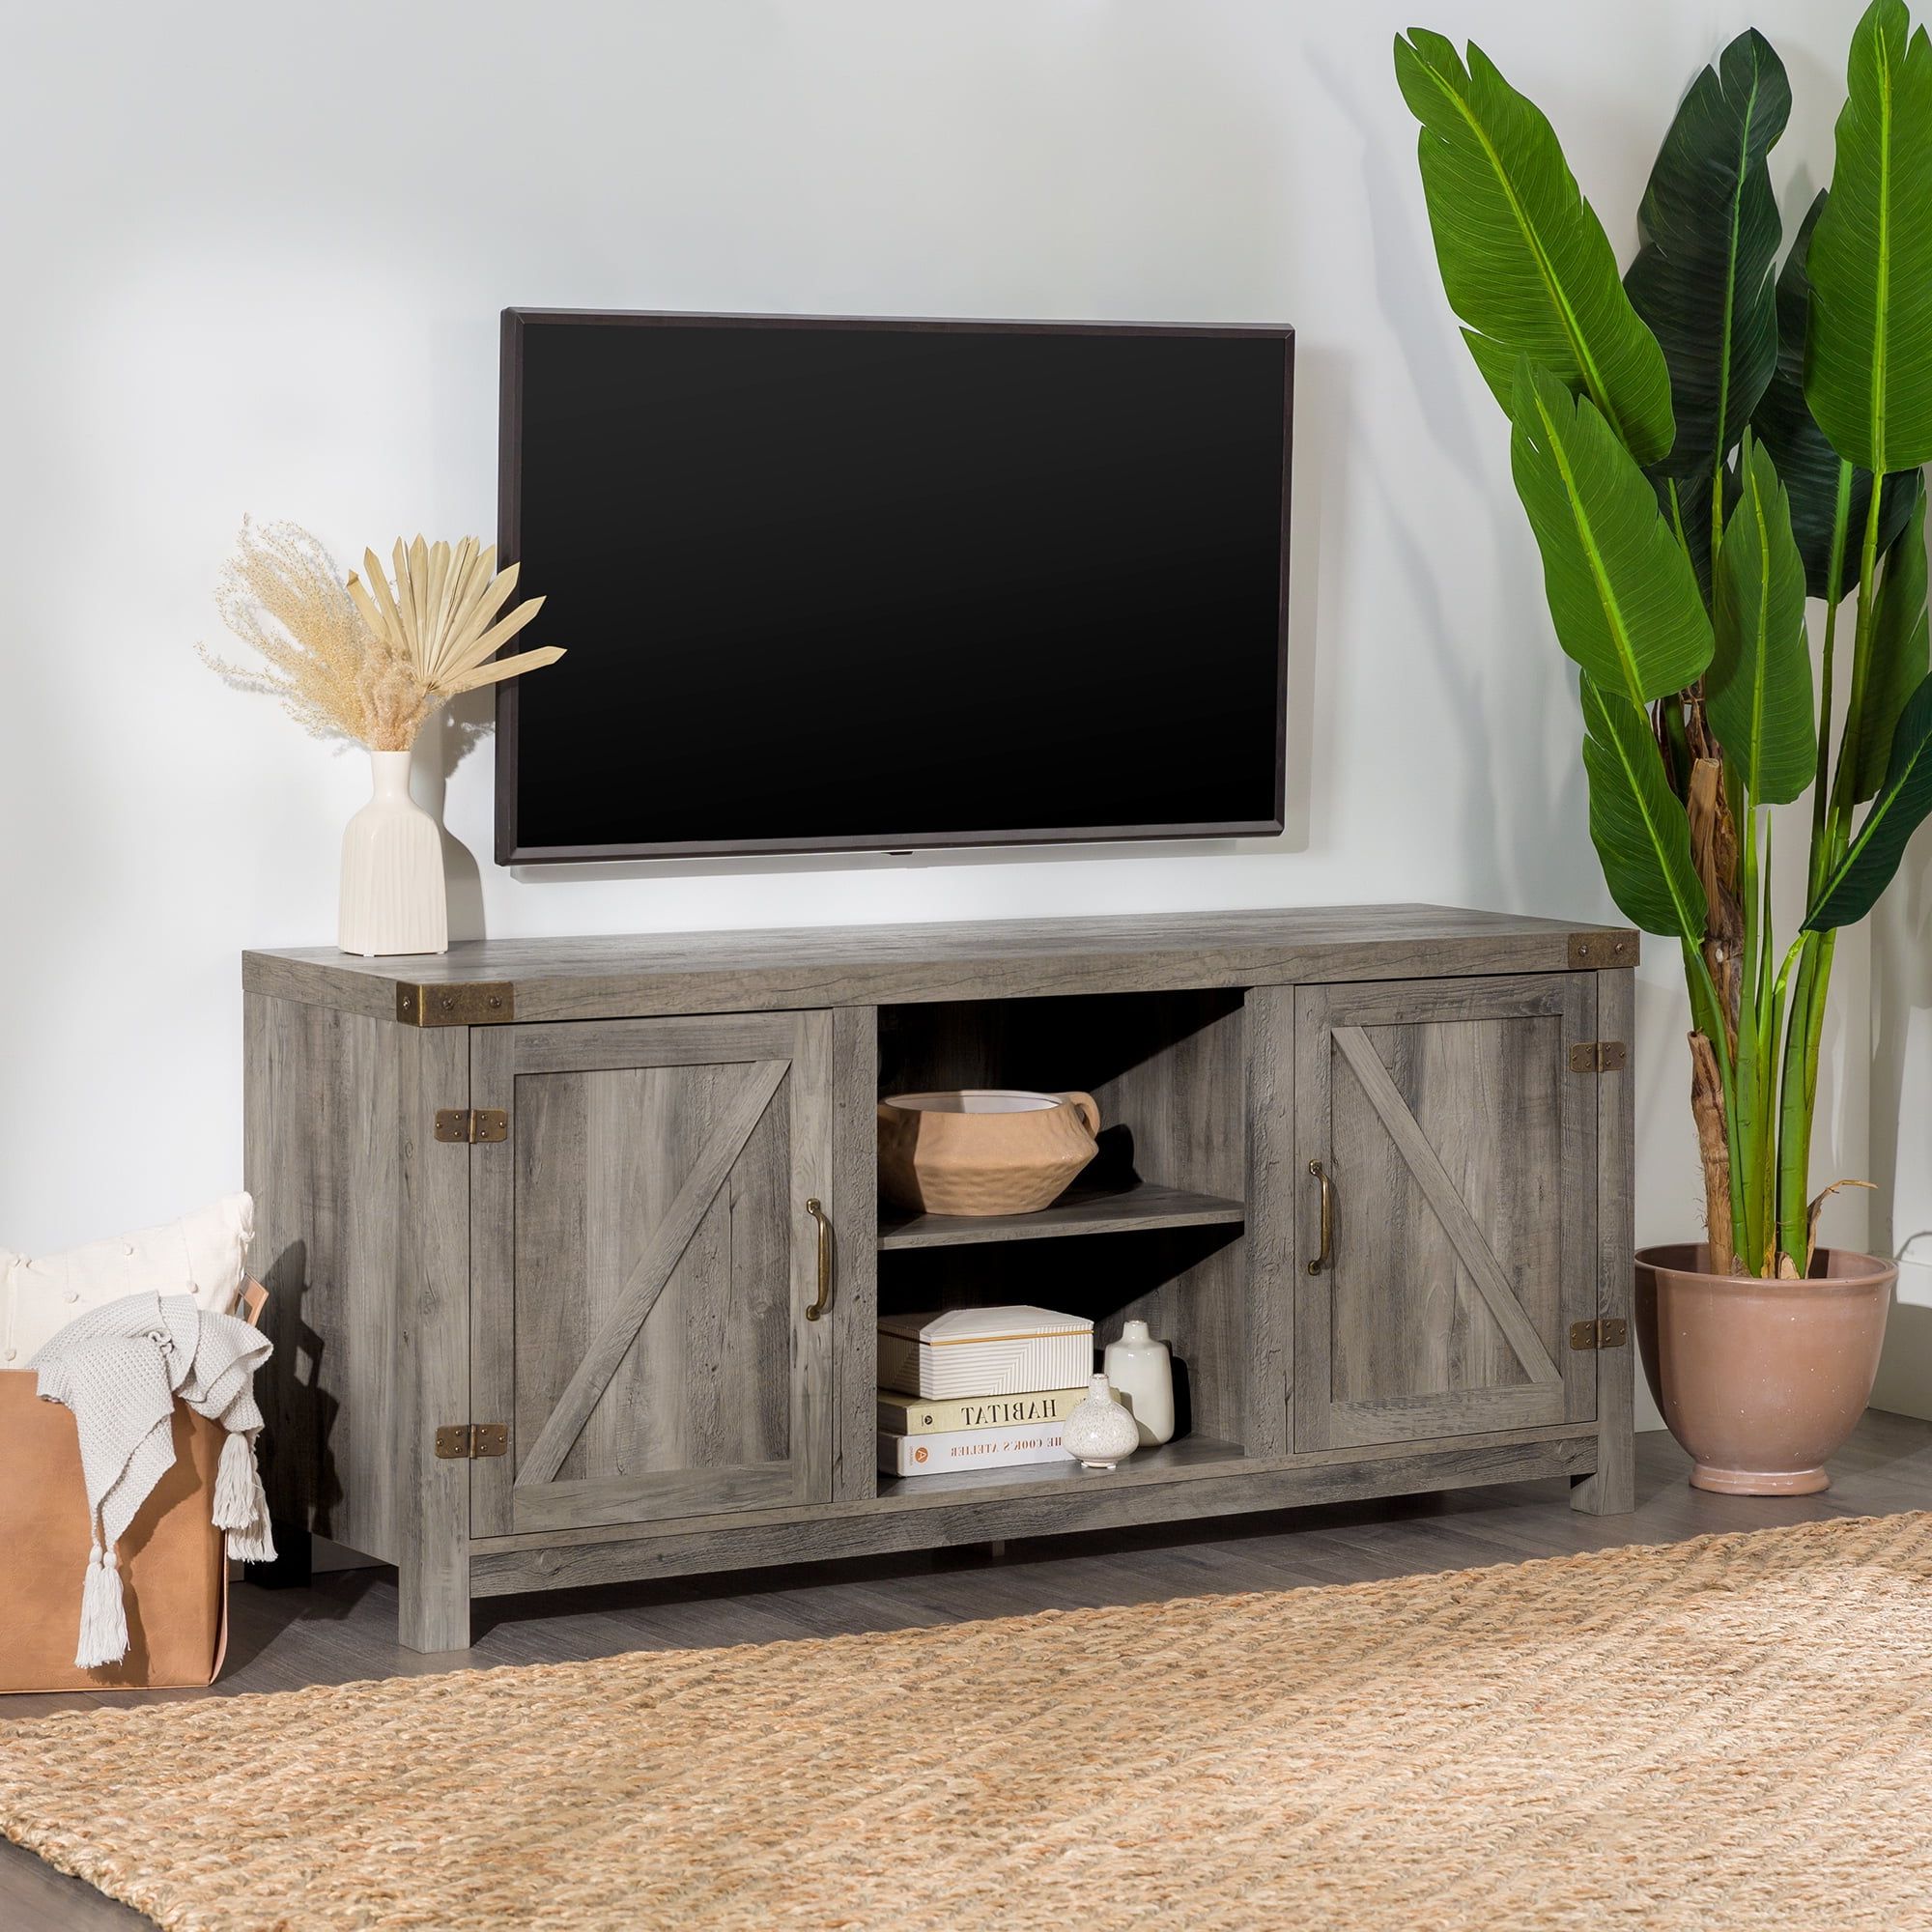 Woven Paths Modern Farmhouse Barn Door Tv Stand For Tvs Up To 65″, Grey Within Well Known Modern Farmhouse Barn Tv Stands (Photo 13 of 15)